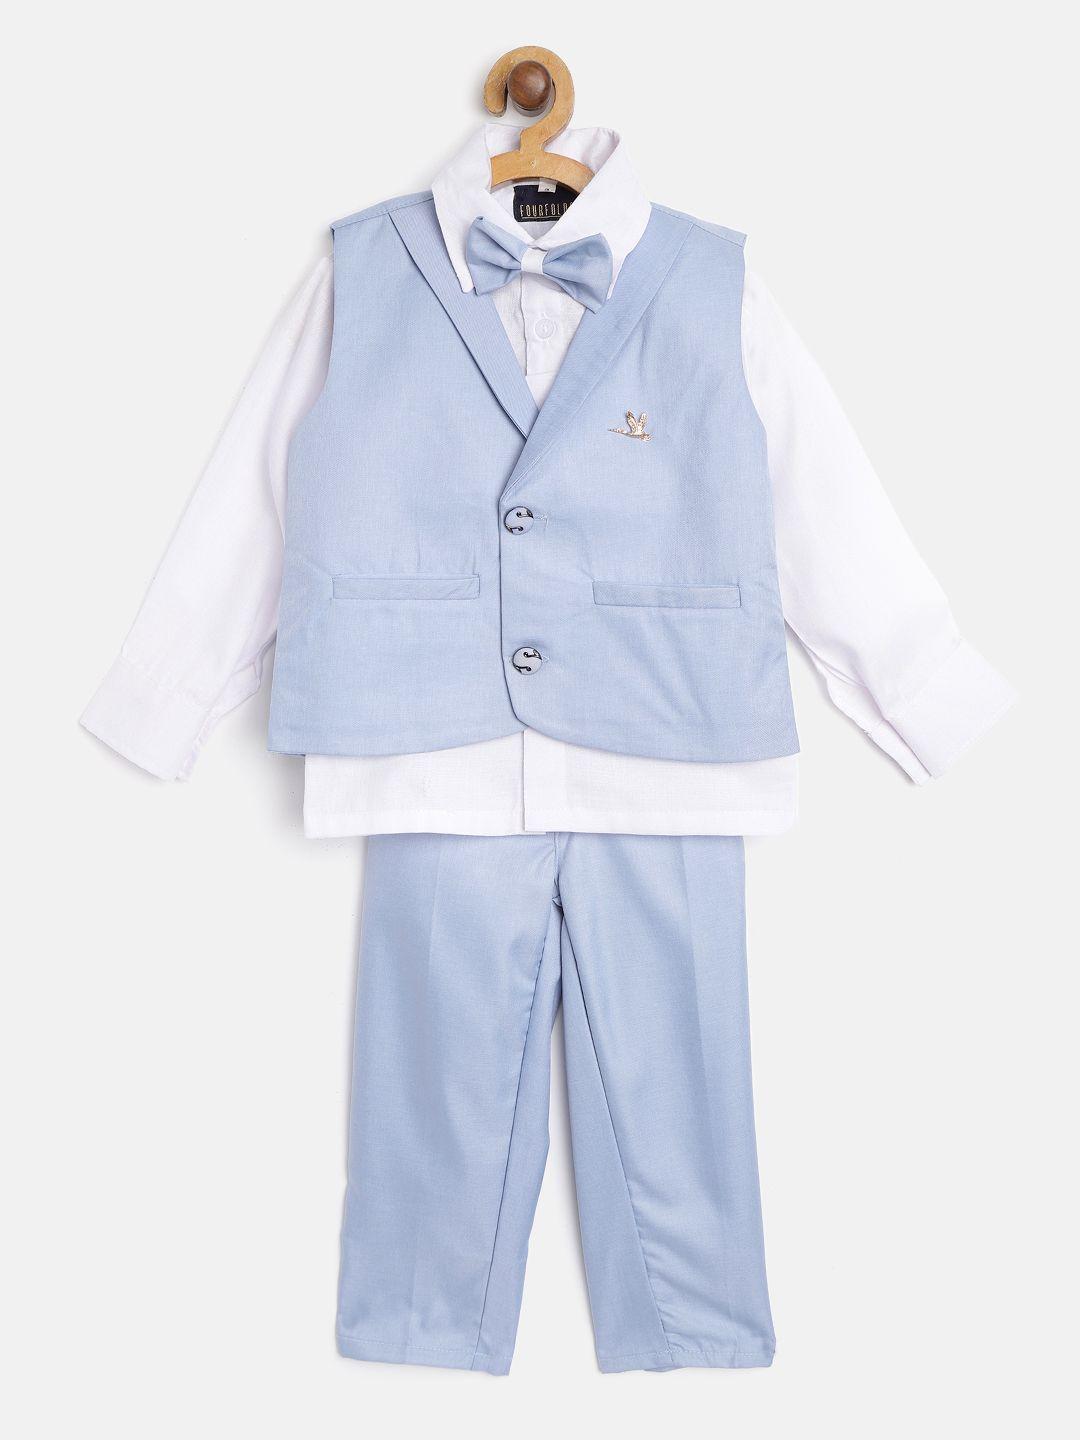 fourfolds boys white & blue solid clothing set with waistcoat & bow-tie